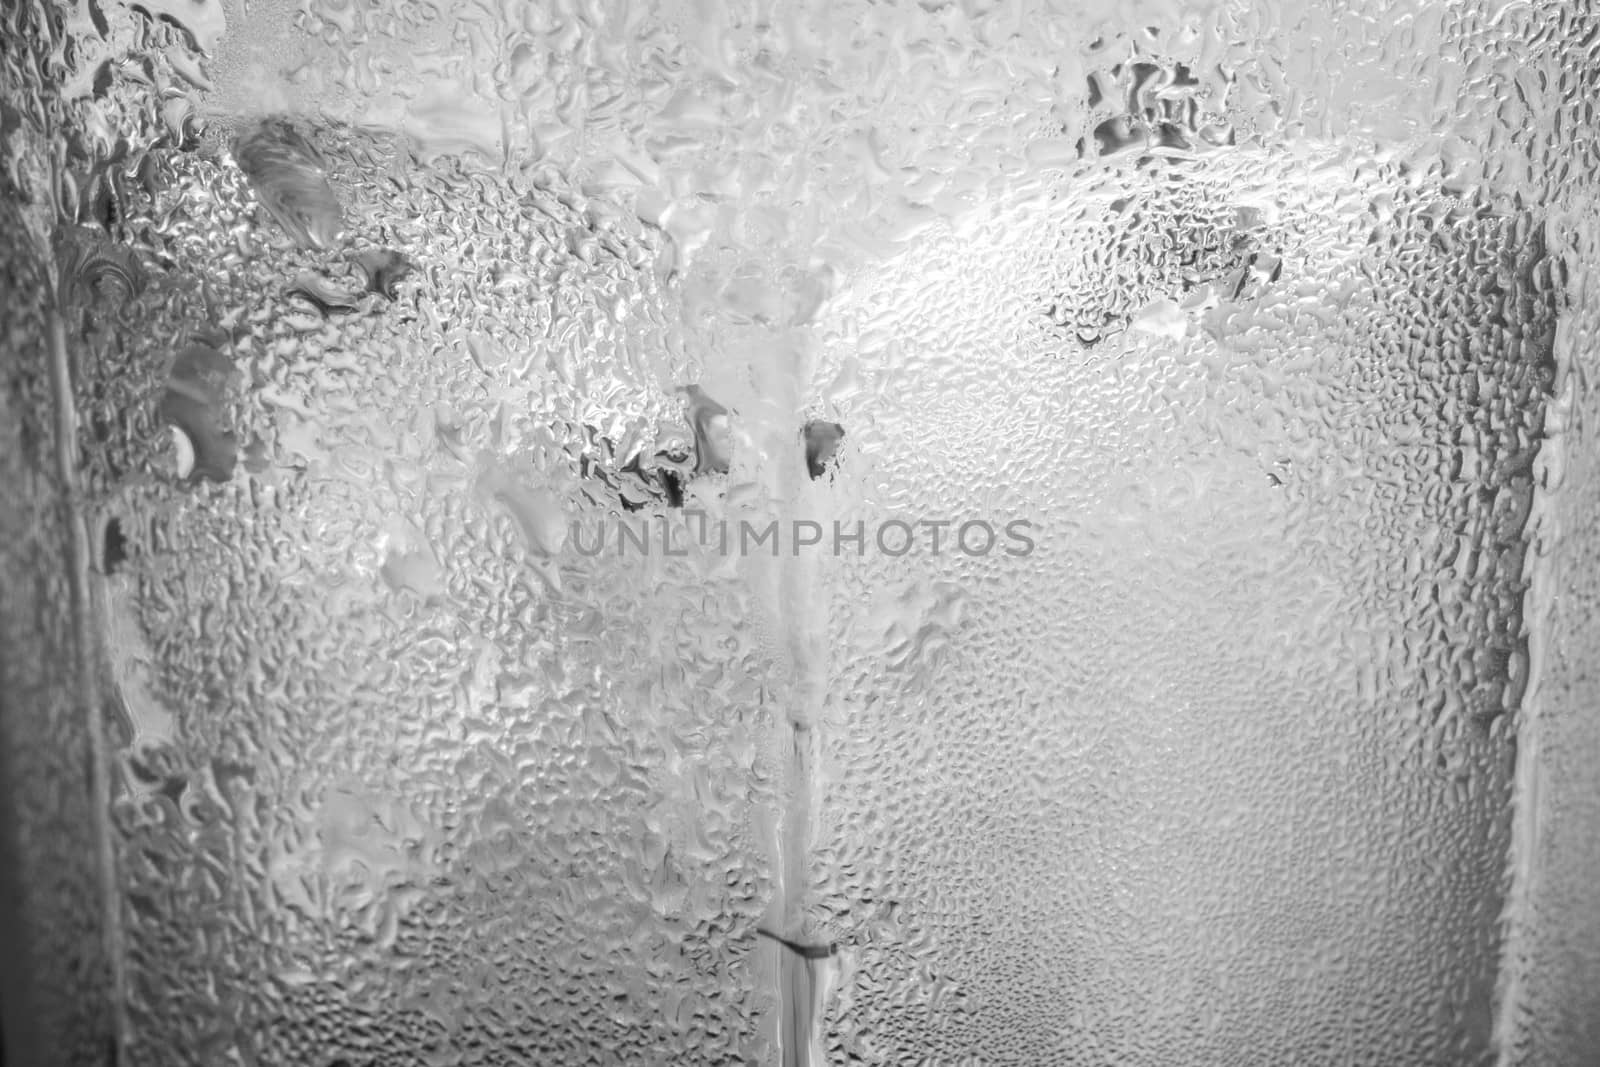 droplets from glass of water in bw theme. use for background, articles, columm, web design, or other you want